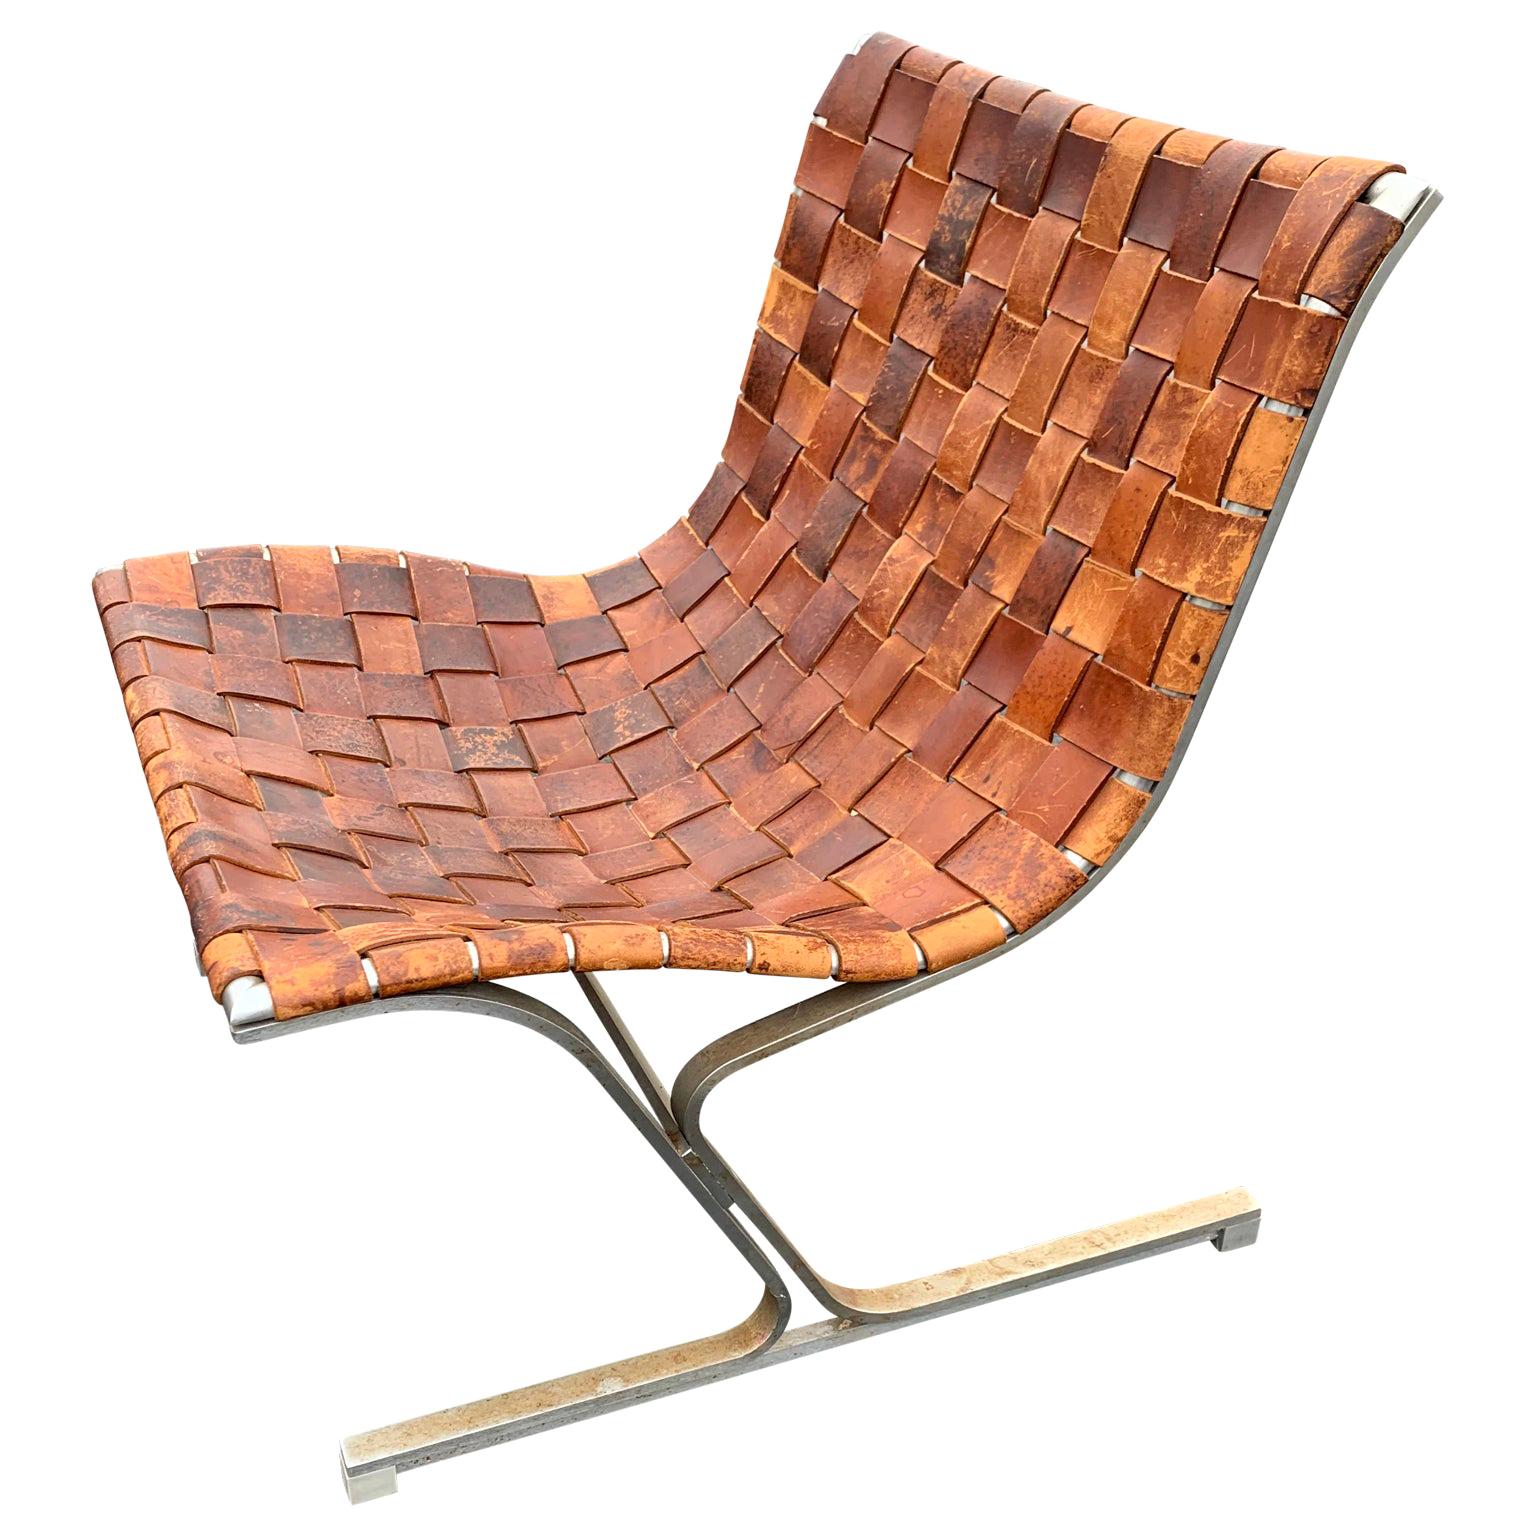 Italian Lounge Chair in Cognac-Color Leather by Ross Littell, Milan, Circa 1965